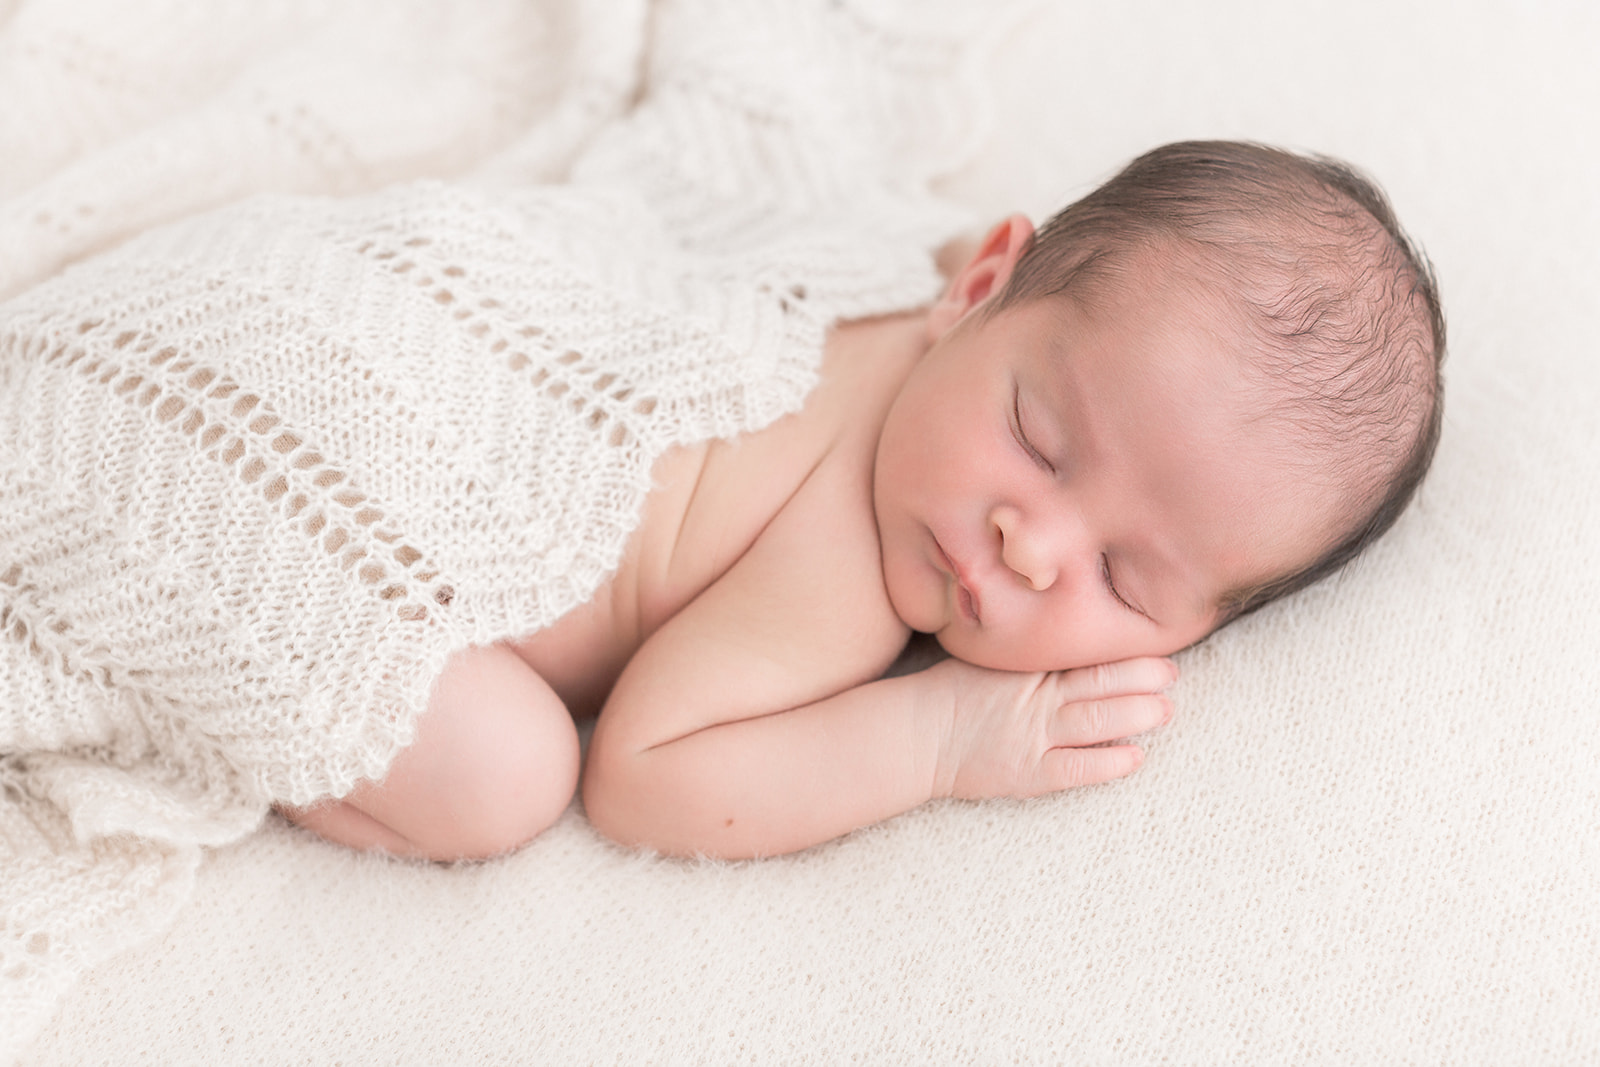 A newborn baby sleeps under a knit blanket on a white bed thanks to Portland Fertility Clinics